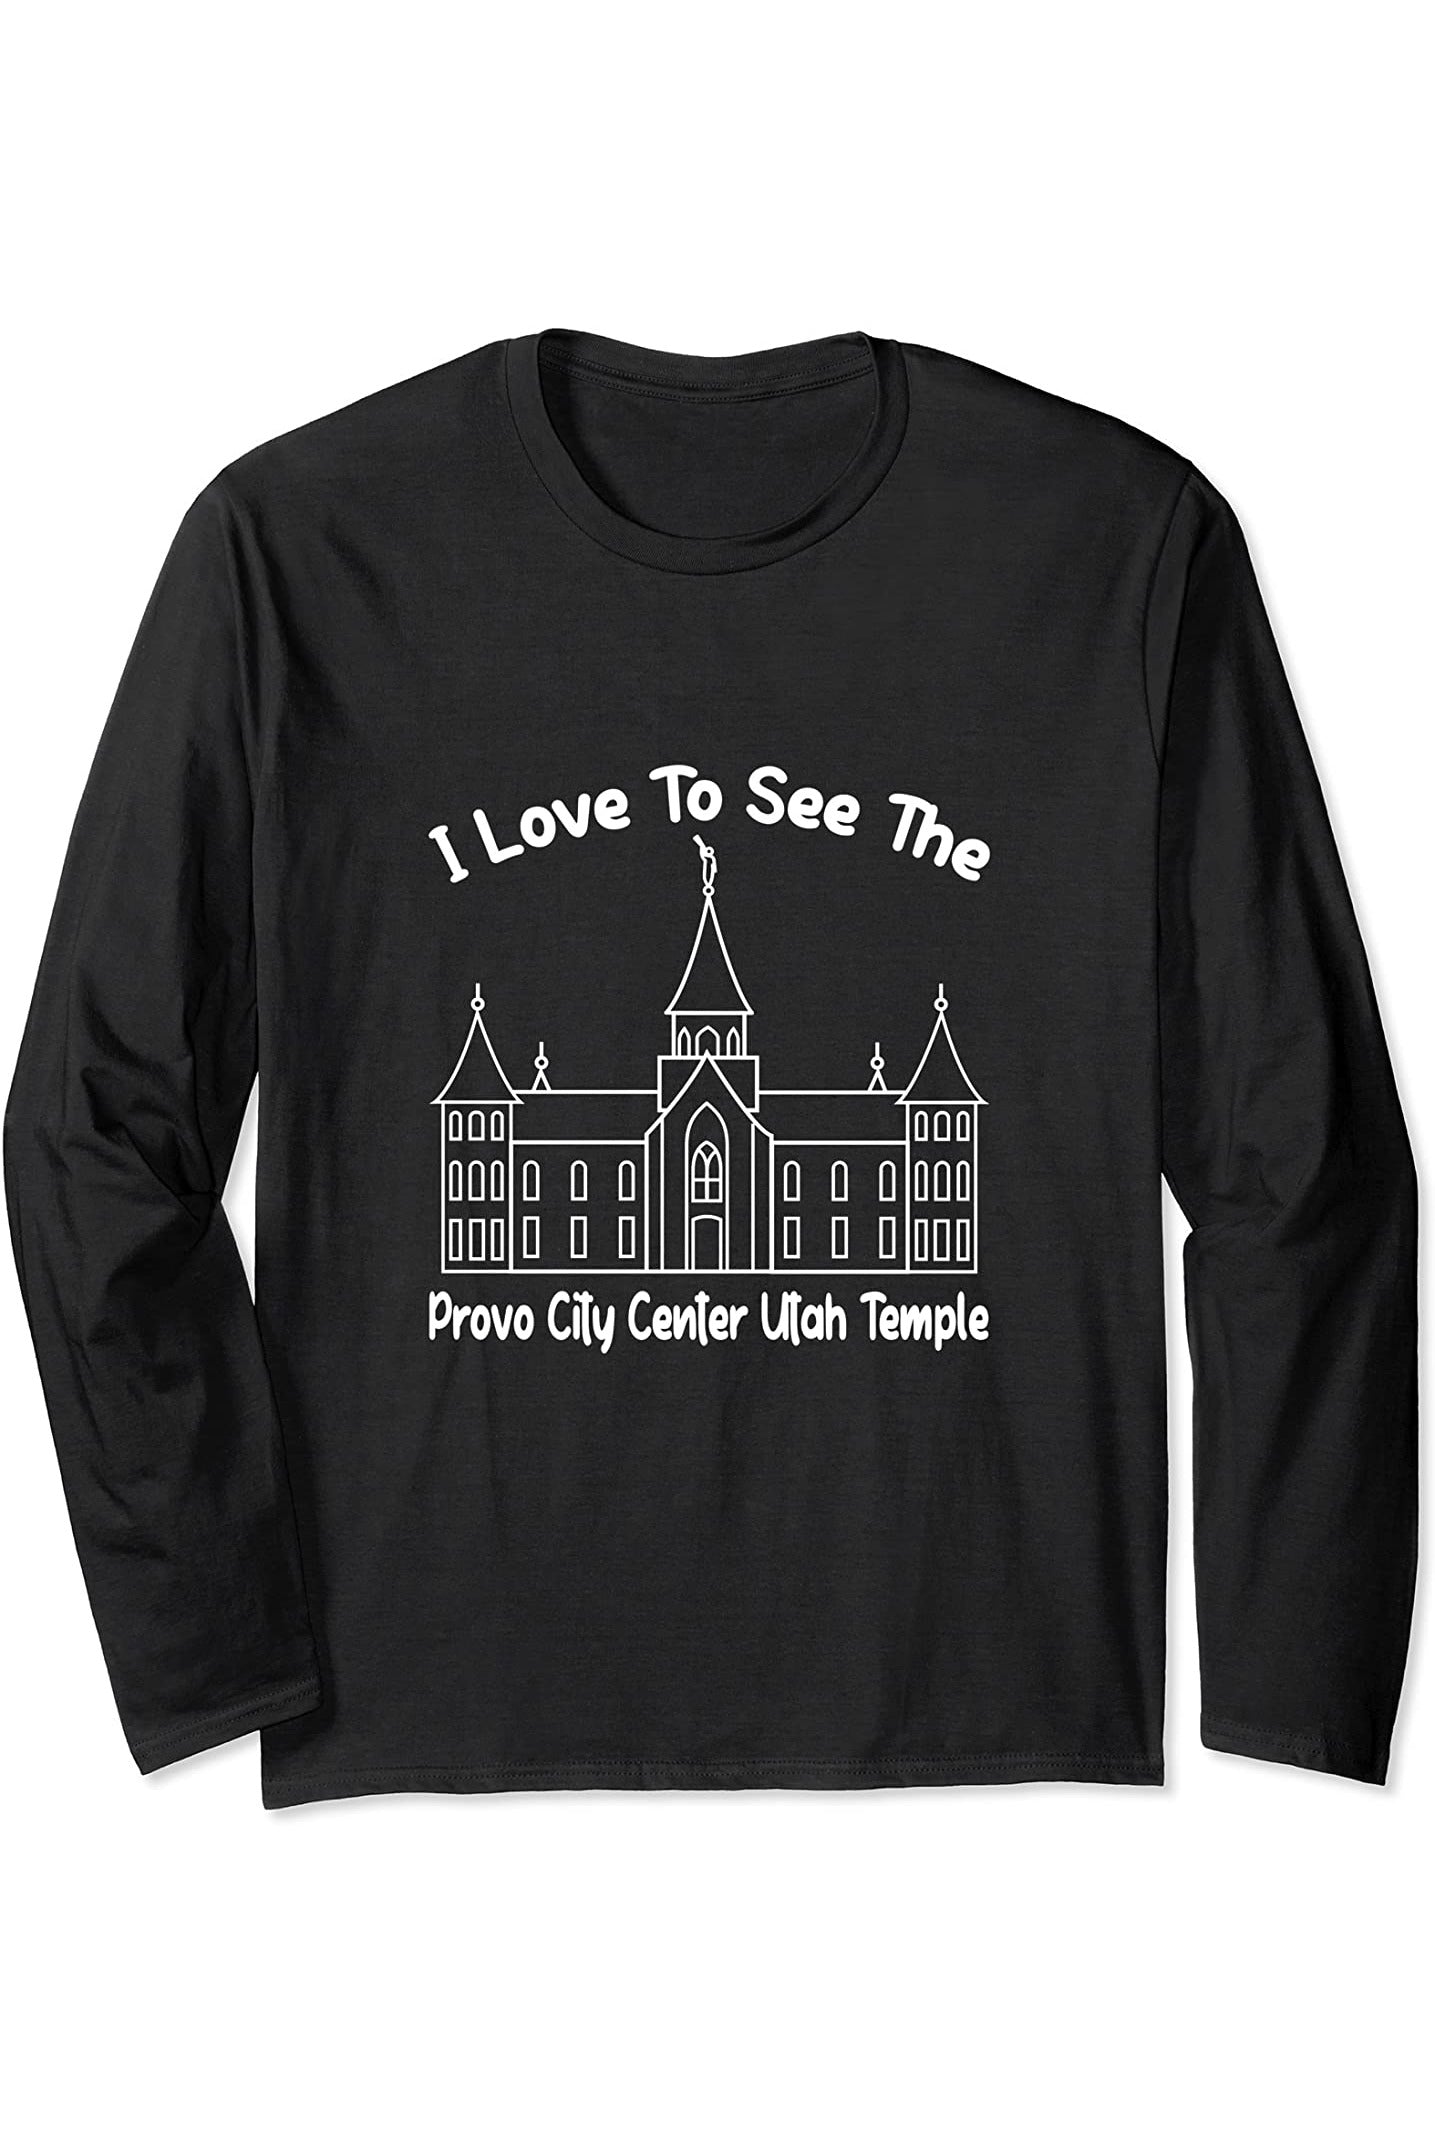 Provo City Center Utah Temple Long Sleeve T-Shirt - Primary Style (English) US